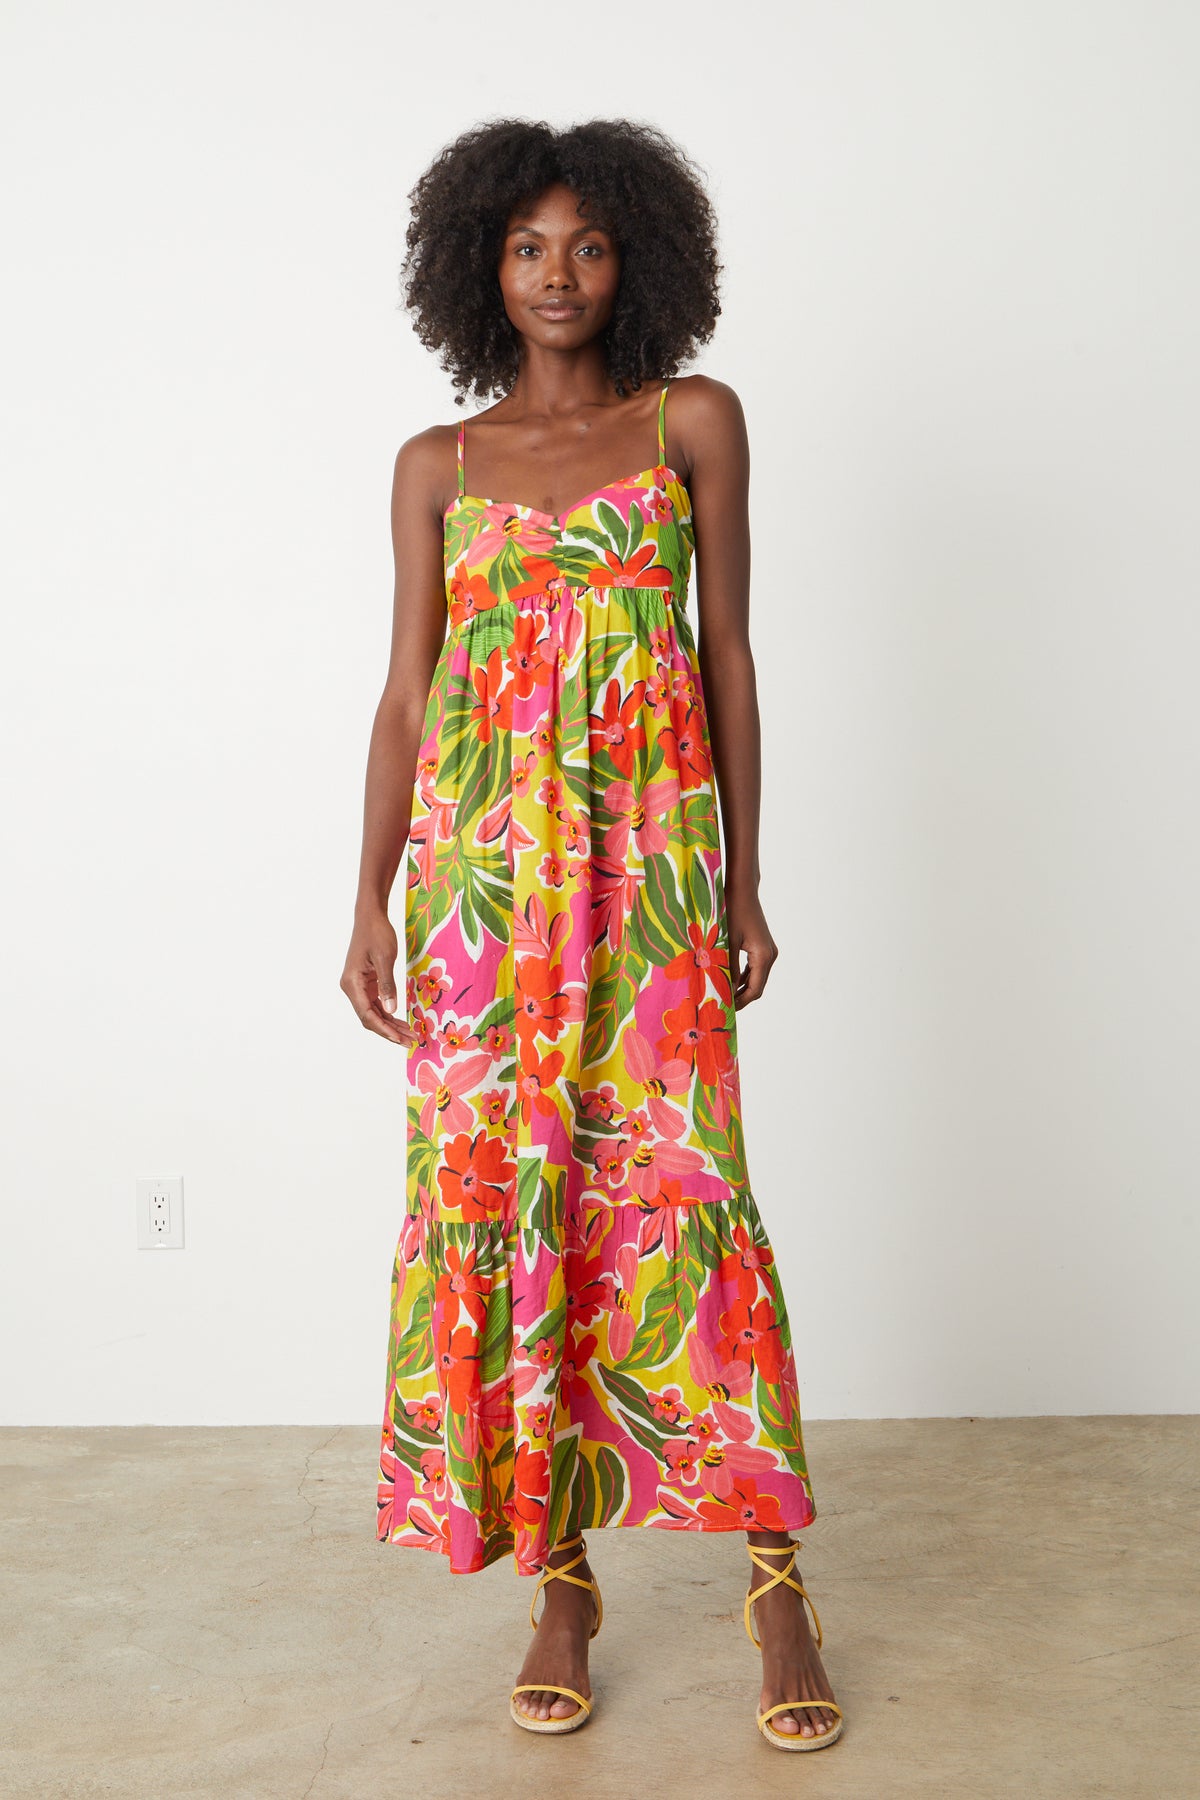   A woman wearing the Velvet by Graham & Spencer KAYLA PRINTED MAXI DRESS. 